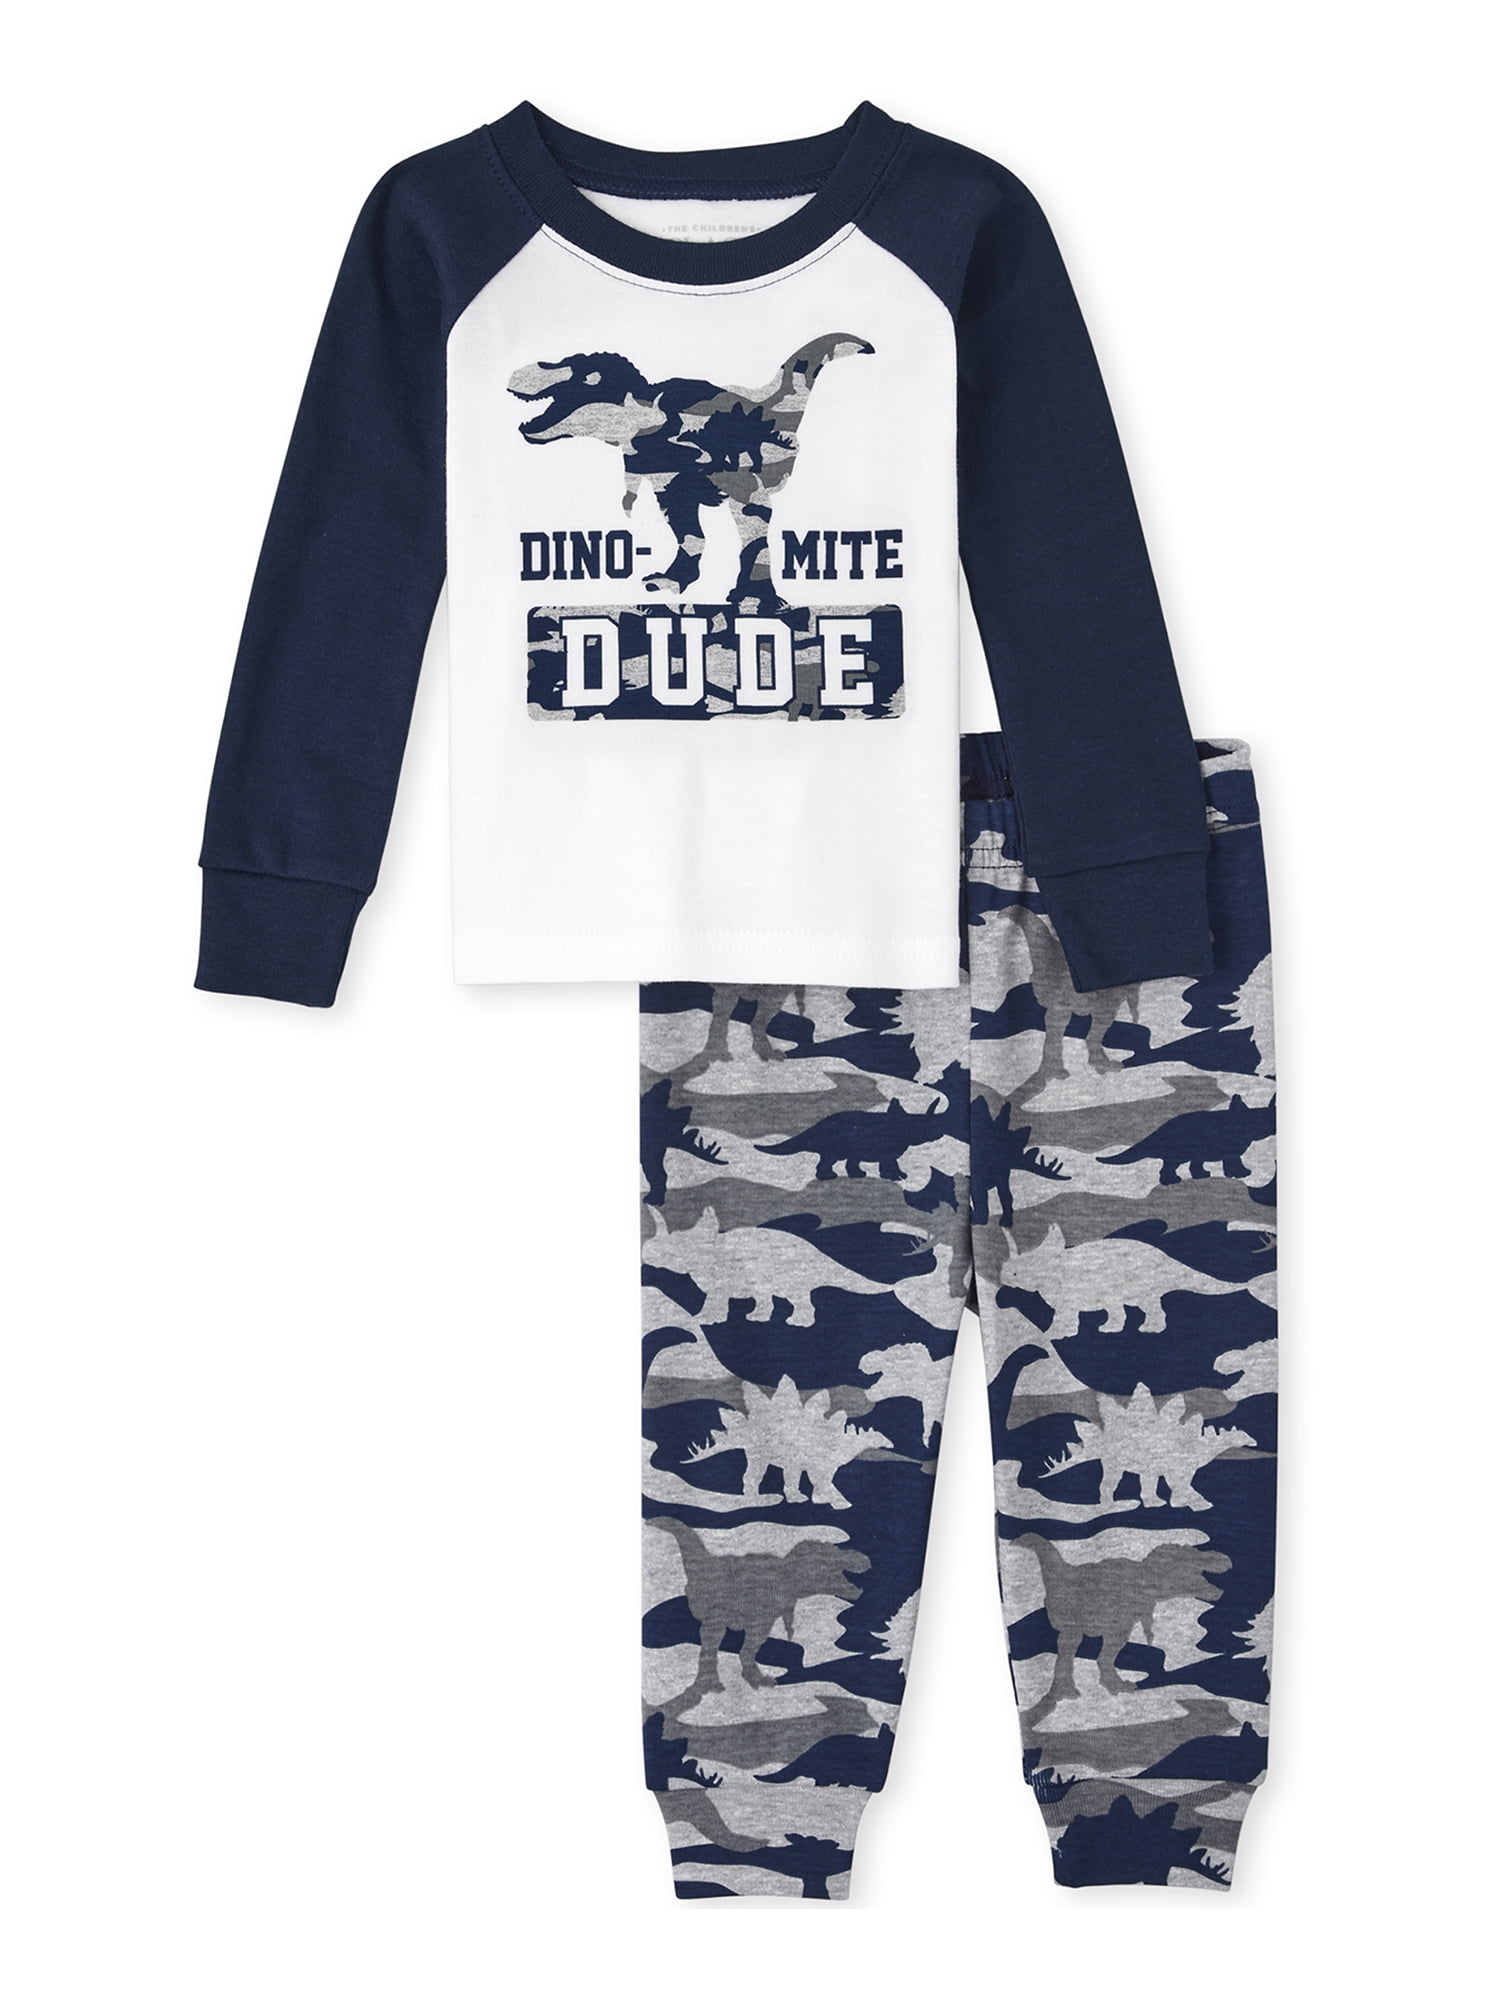 NWT The Childrens Place Boys Space Print Long Sleeve Cotton Pajamas Set 